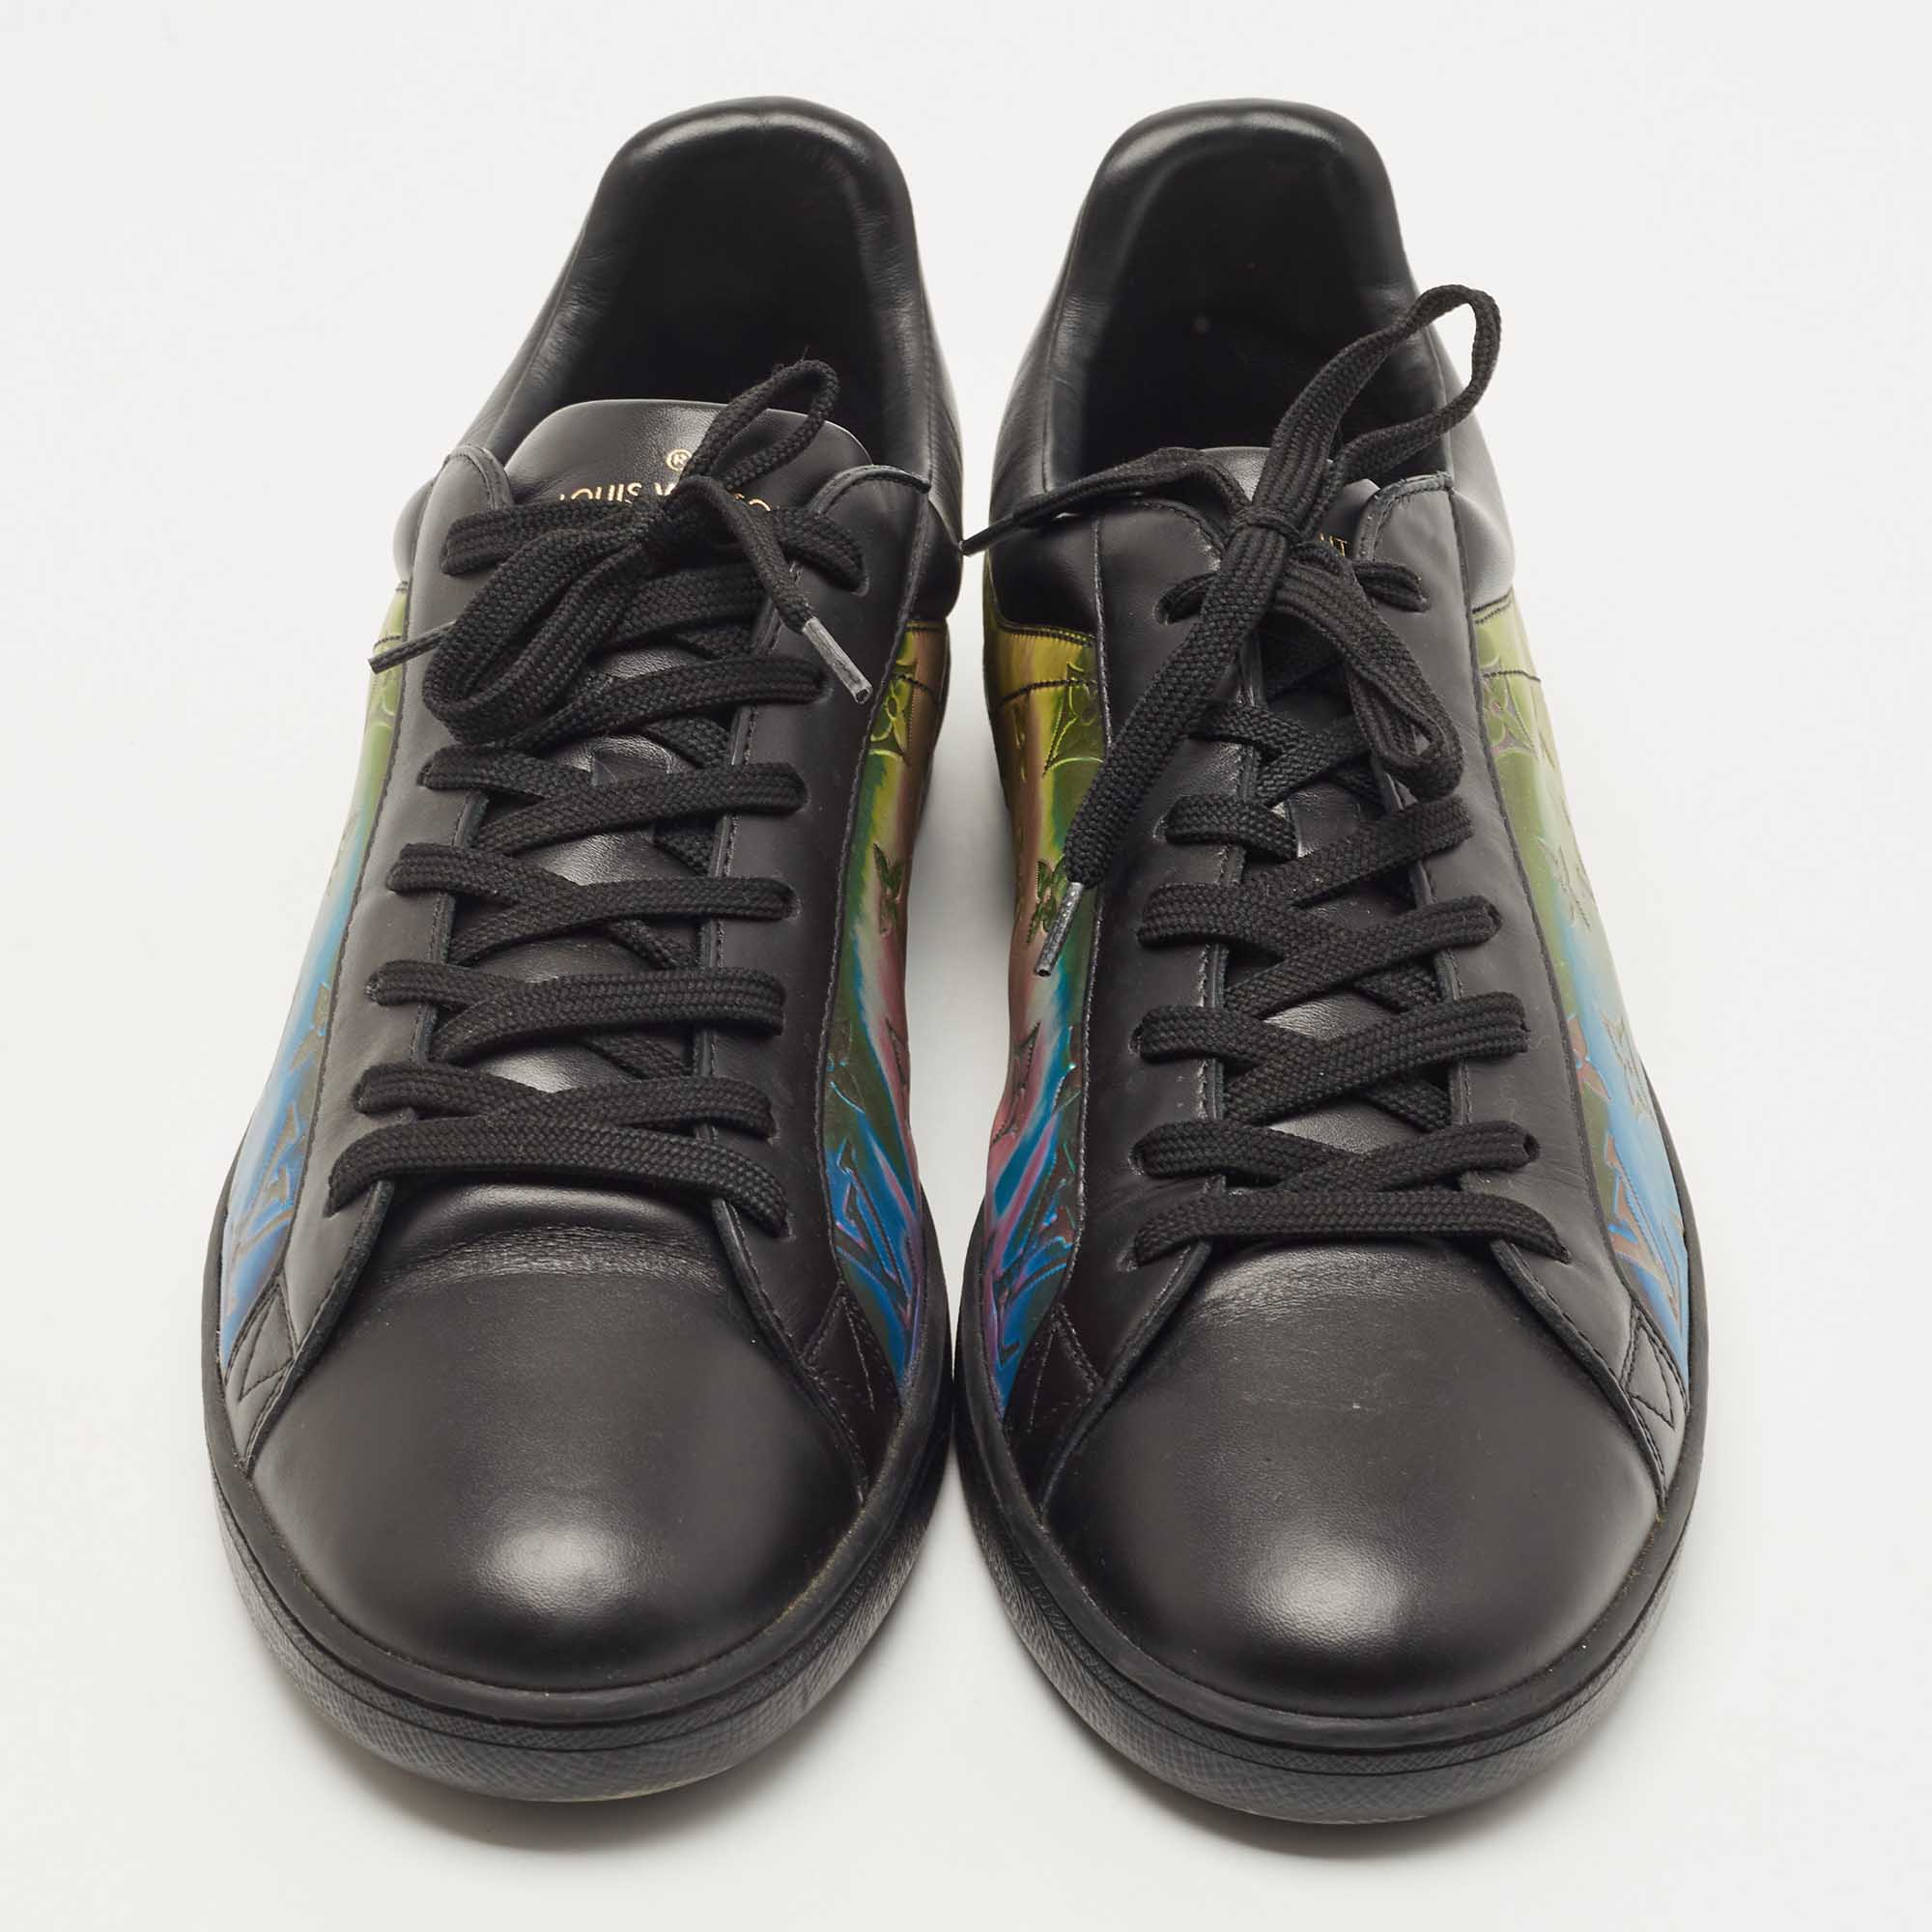 Louis Vuitton Black/ Iridescent Leather and PVC Luxembourg Low Top Sneakers  Size 43.5 Louis Vuitton